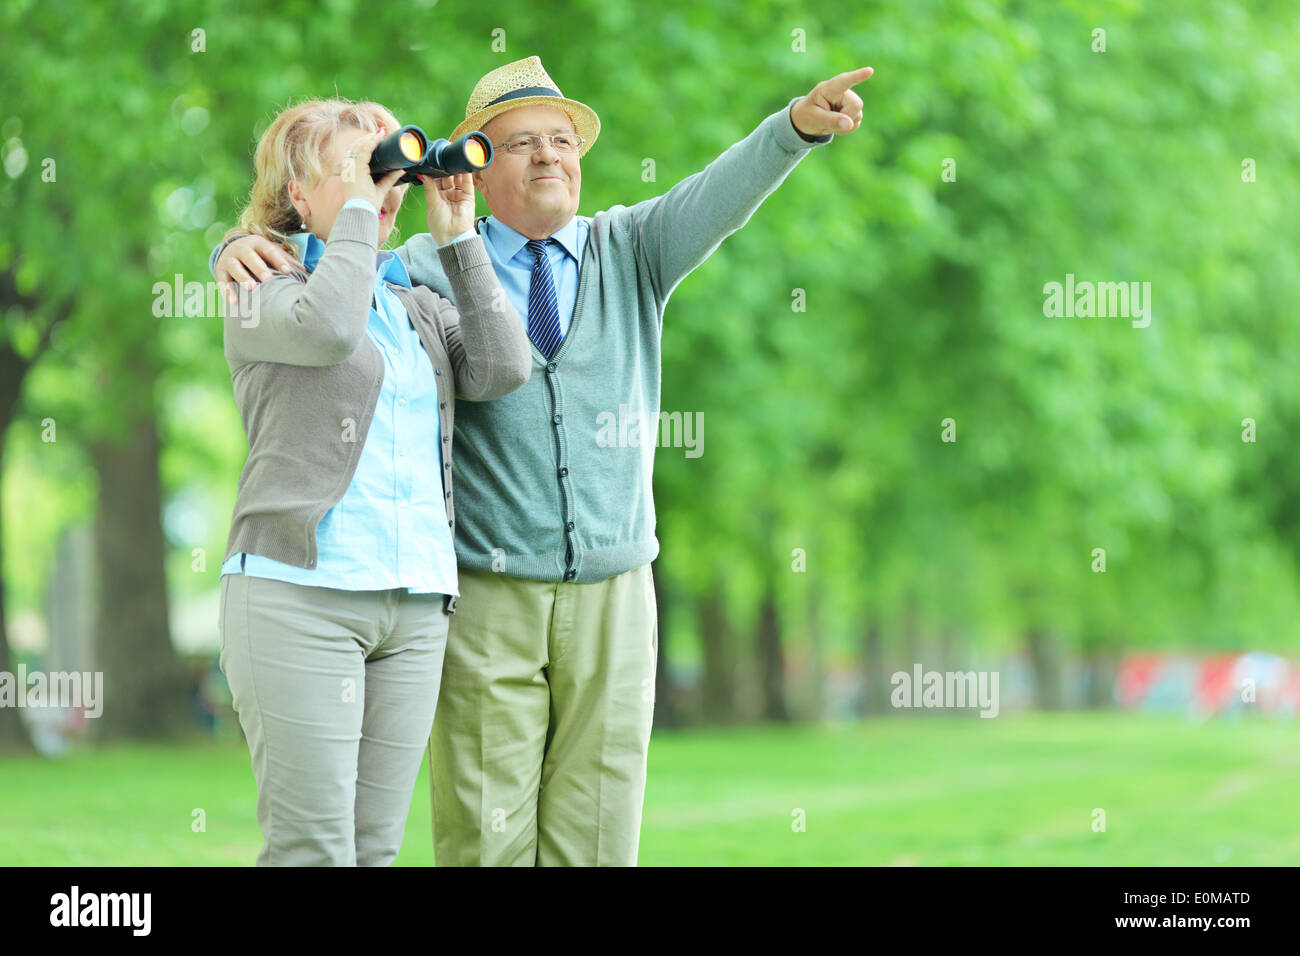 Woman looking through binoculars with her husband in park Stock Photo